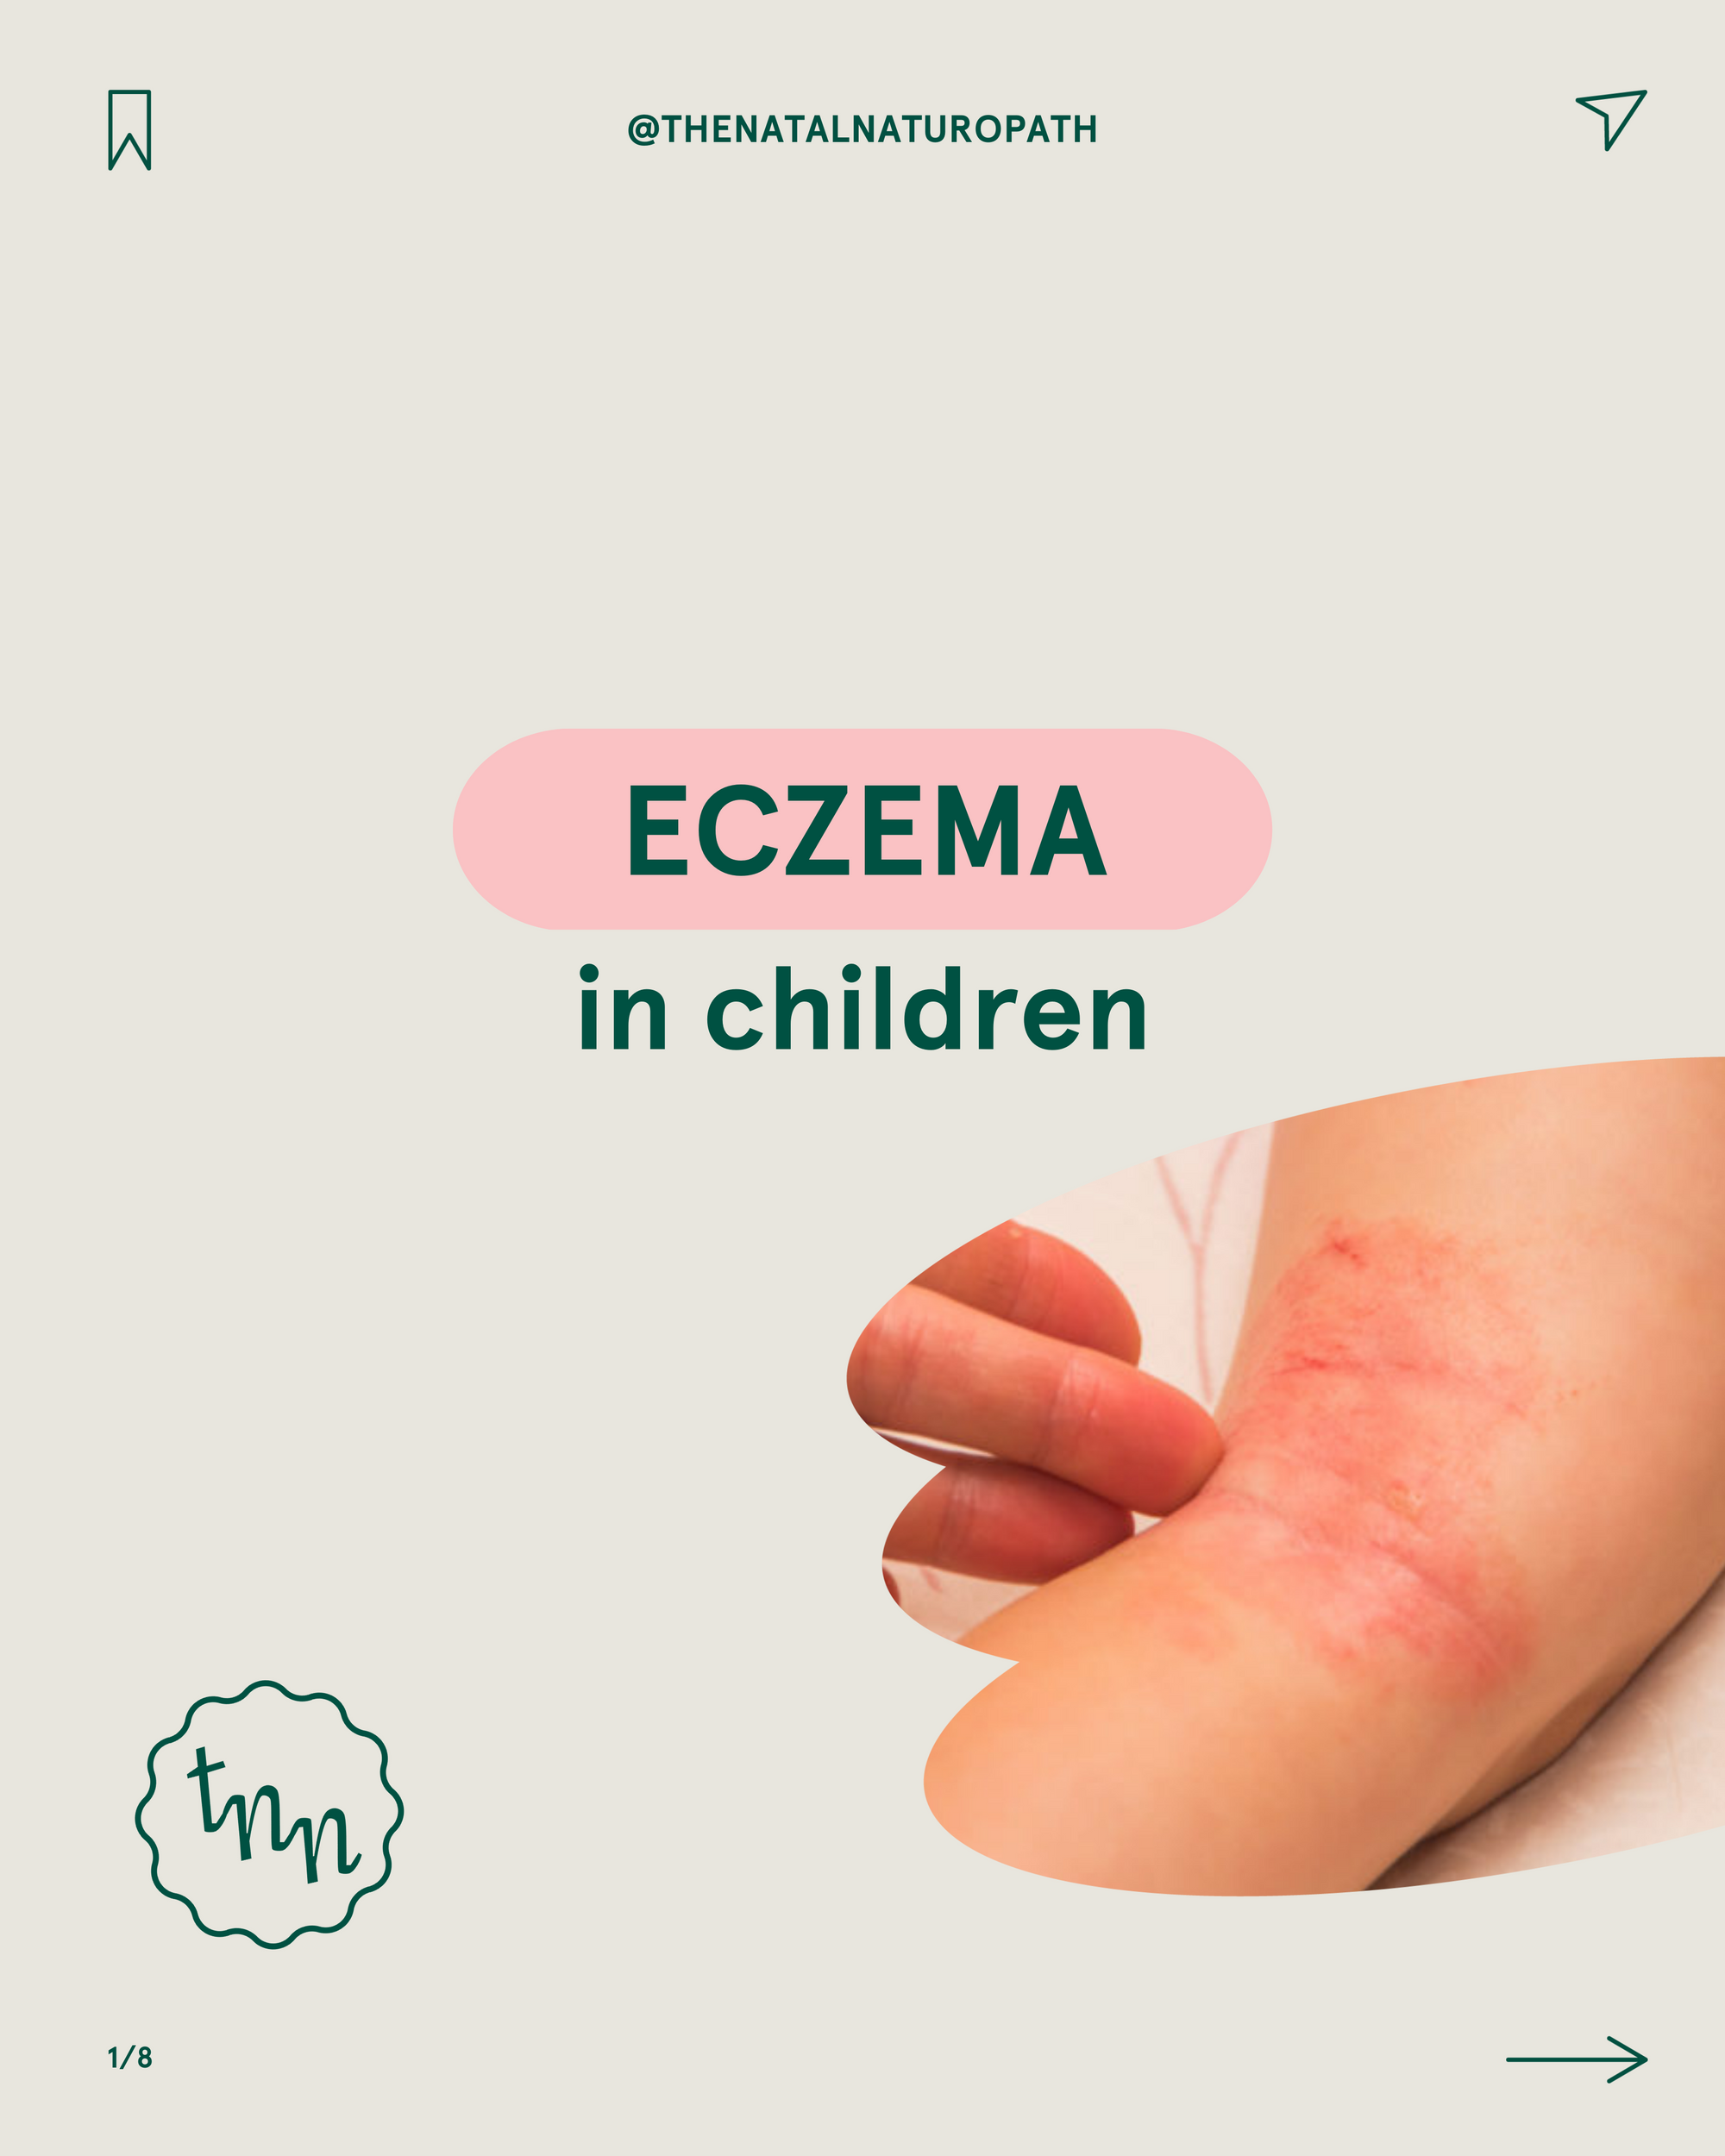 The root causes and natural treatments of eczema in children